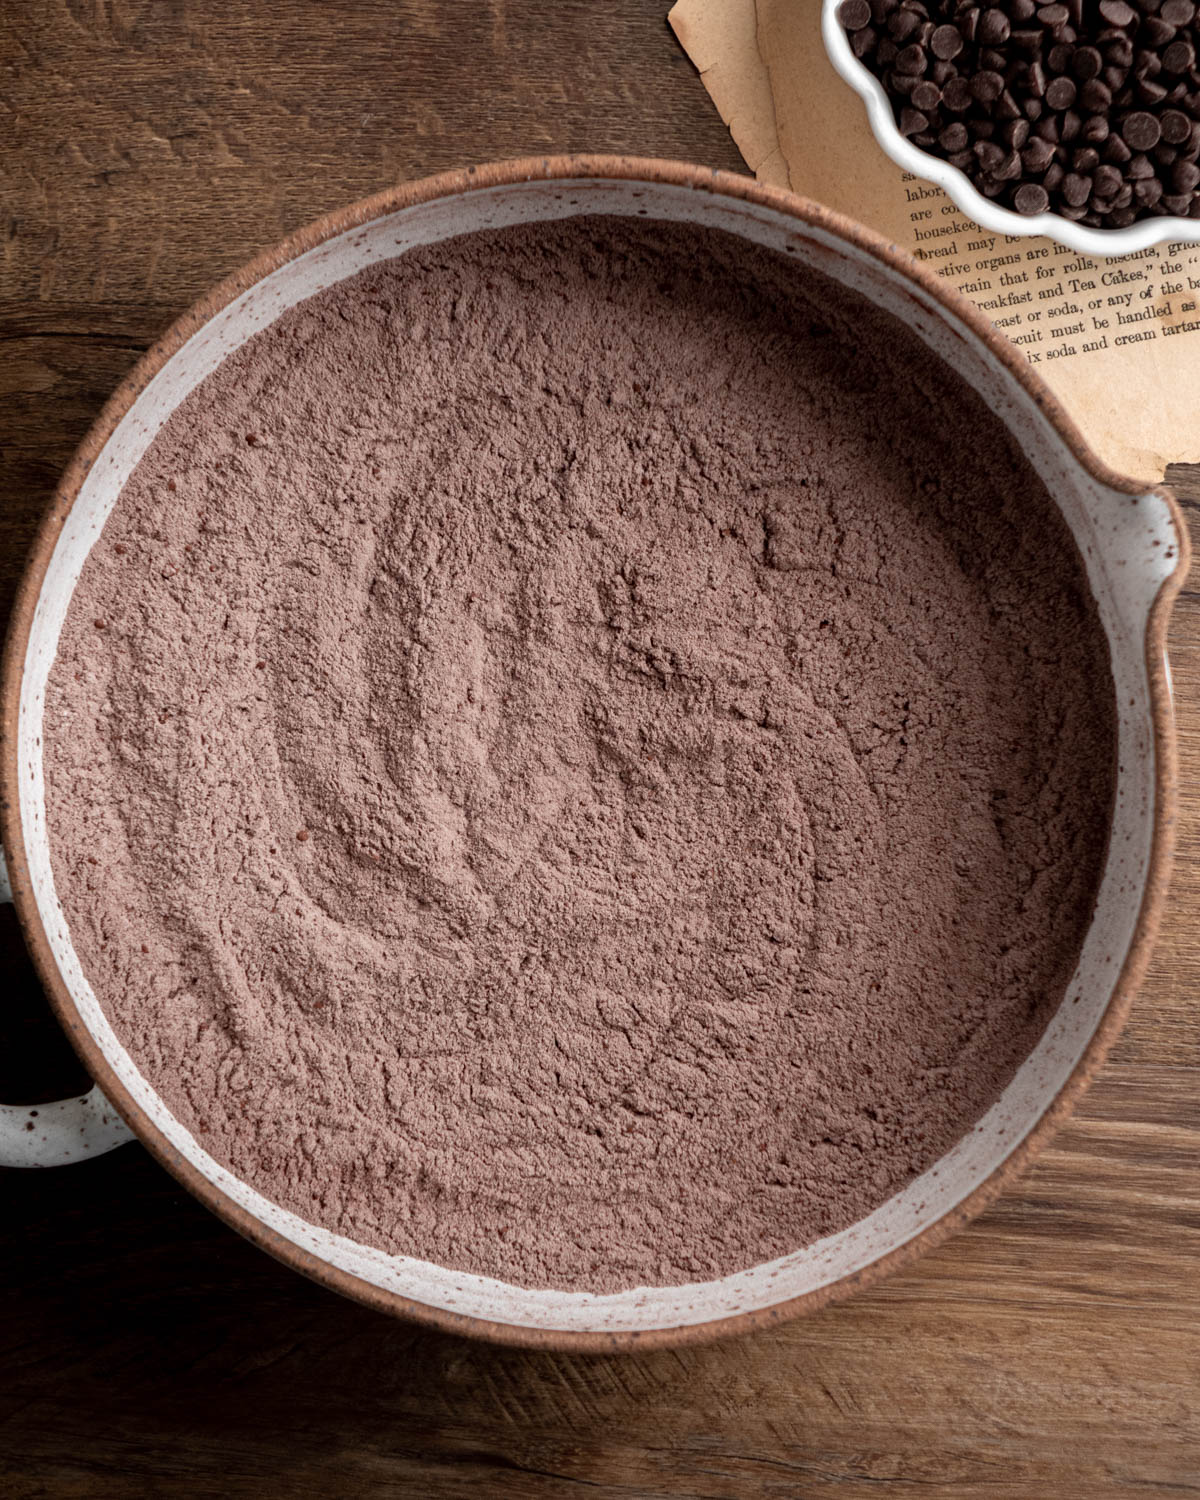 Flour, cocoa powder, baking soda, baking powder and salt whisked together in a pottery bowl